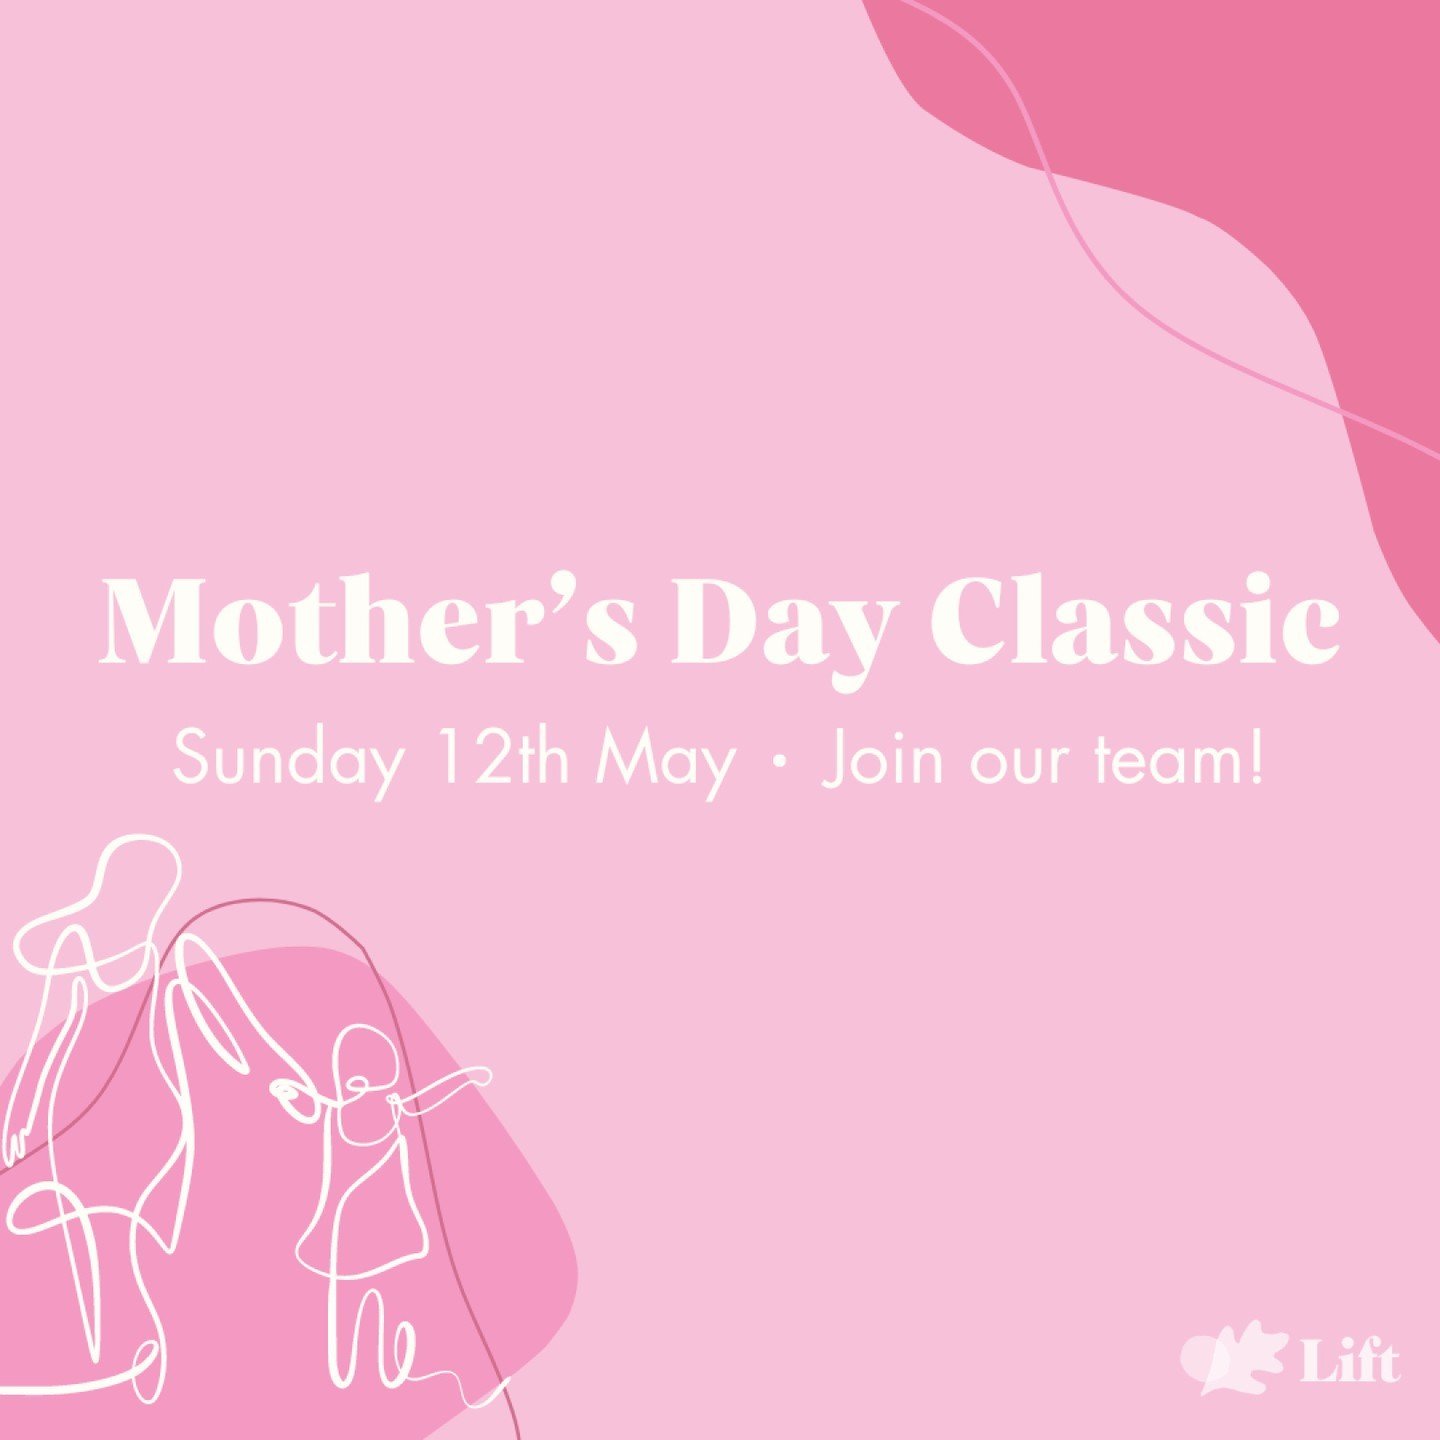 This Sunday the 12th of May, the Lift Cancer Care Services team will be participating in the Mother&rsquo;s Day Classic. 

Community plays a huge role in what we do at Lift, and it&rsquo;s all the better to be able to participate as a team in support